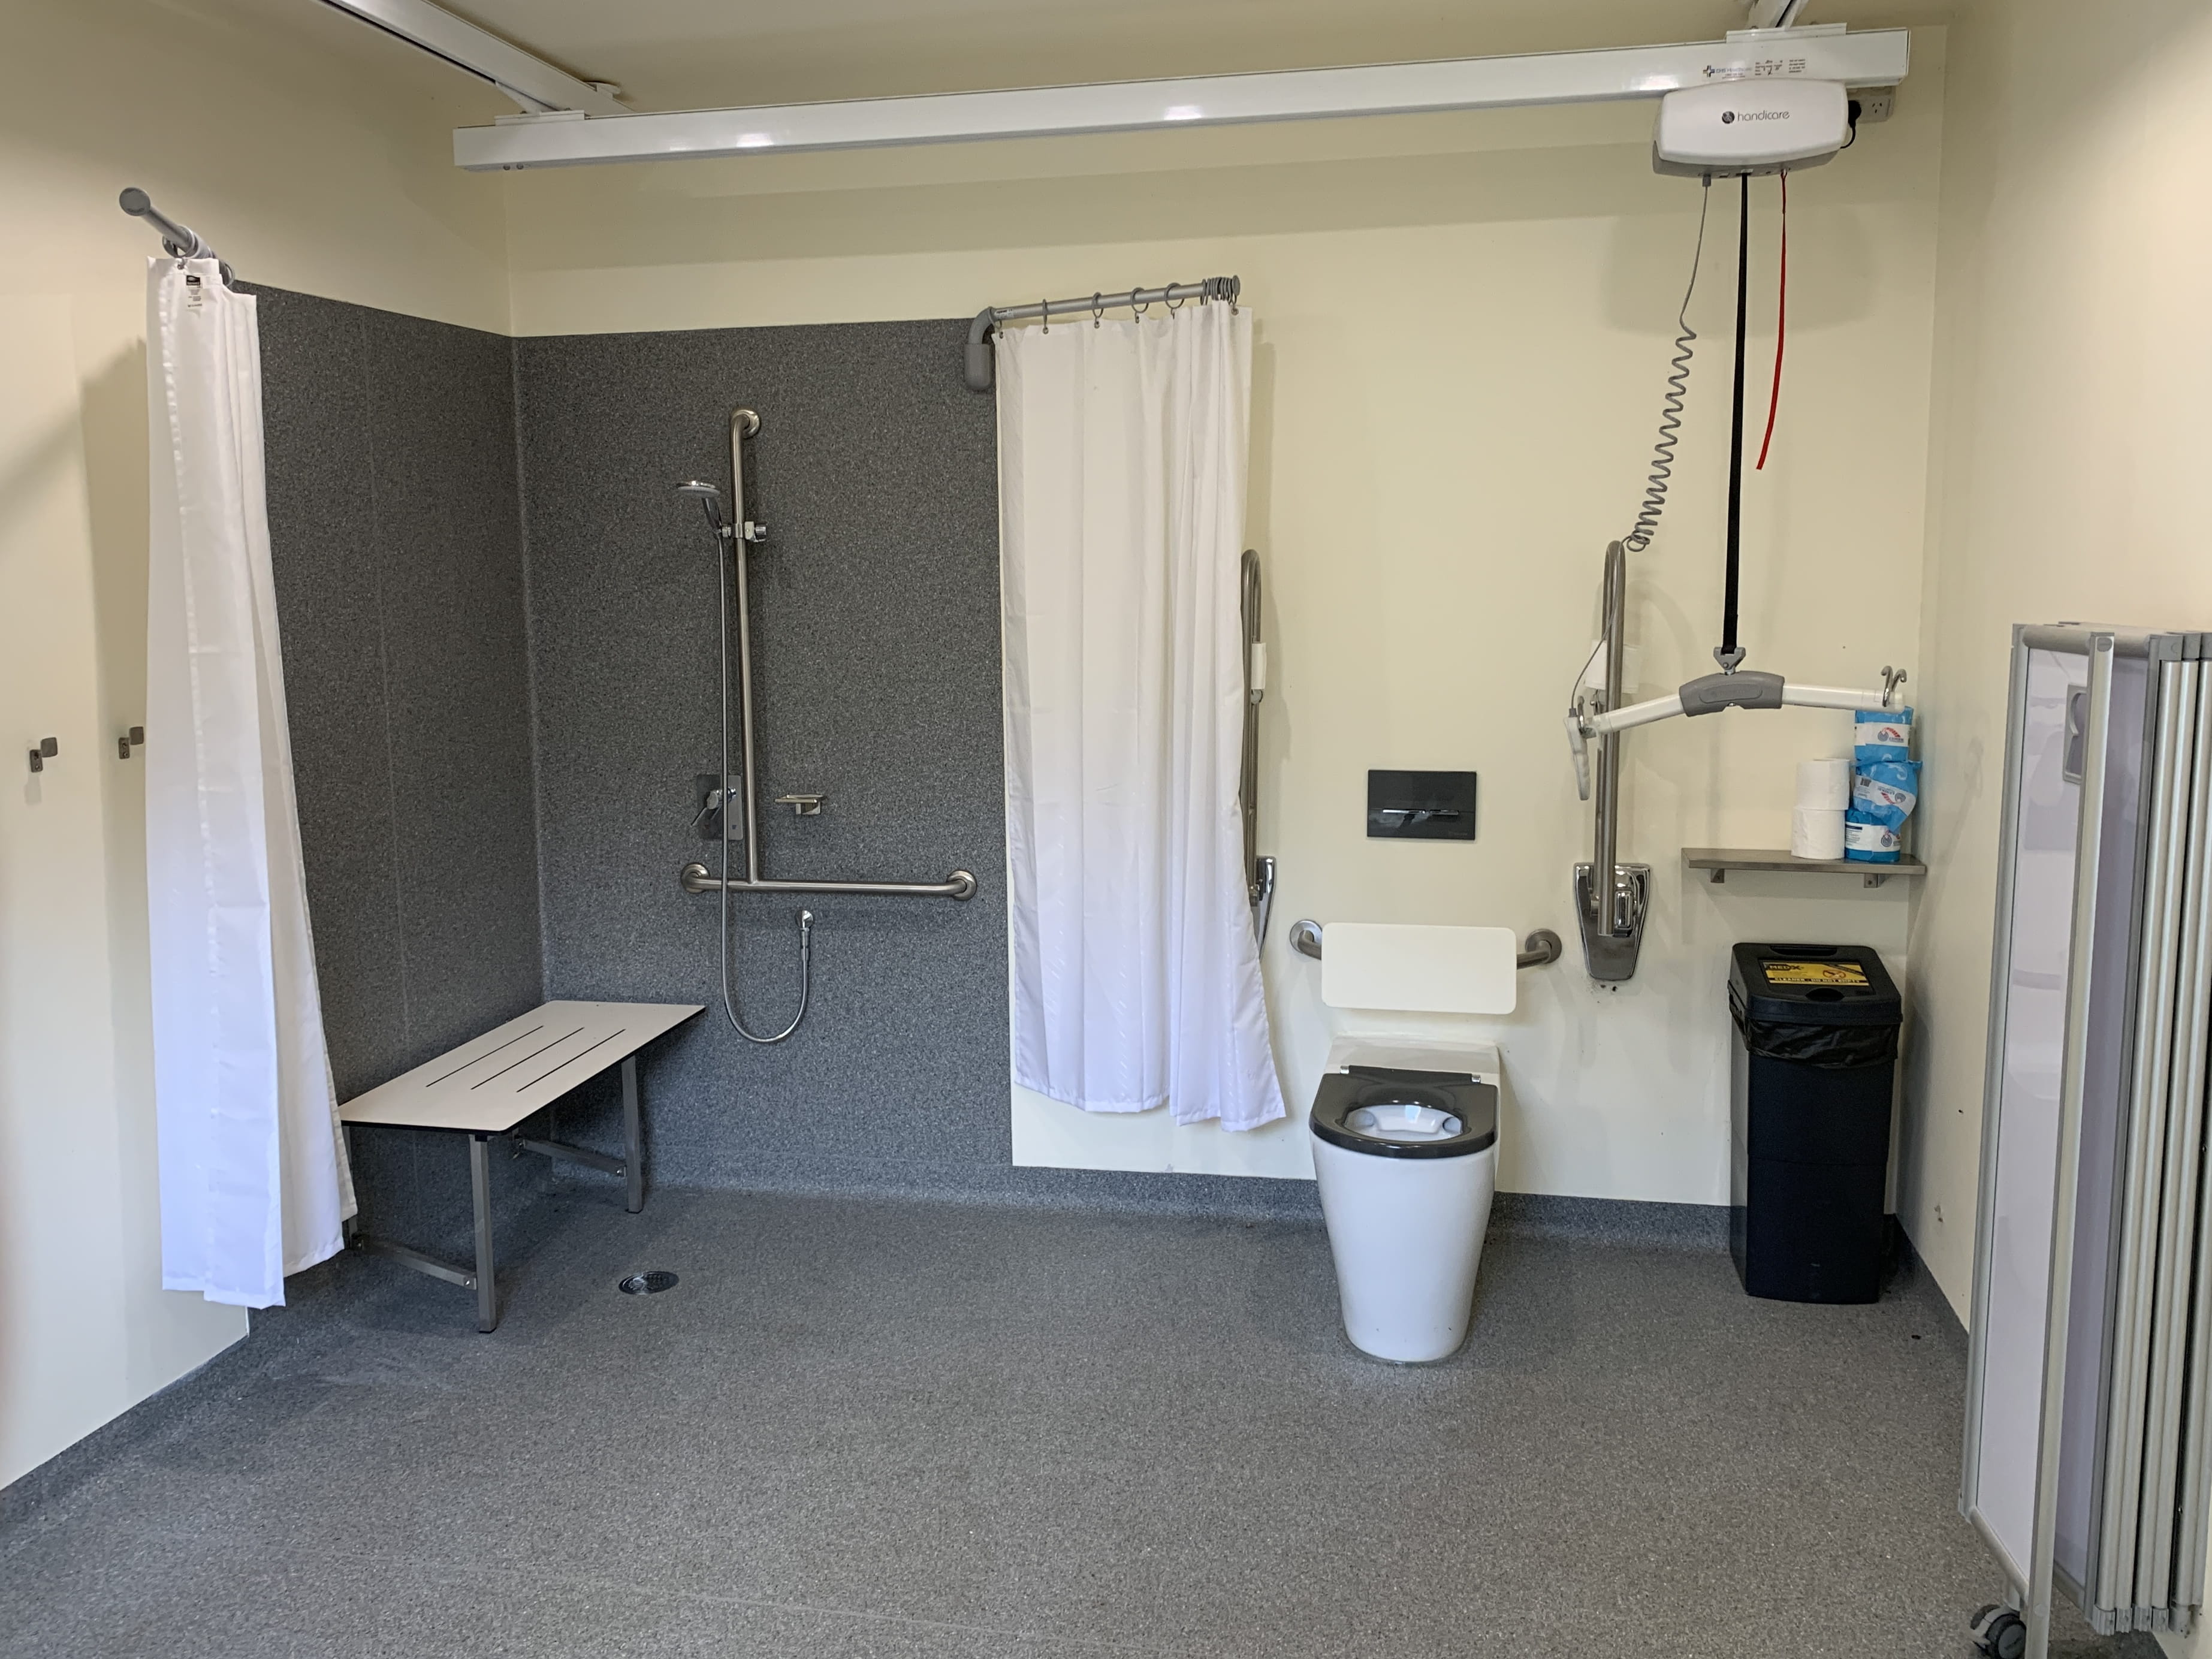 Changing Places toilet and shower room